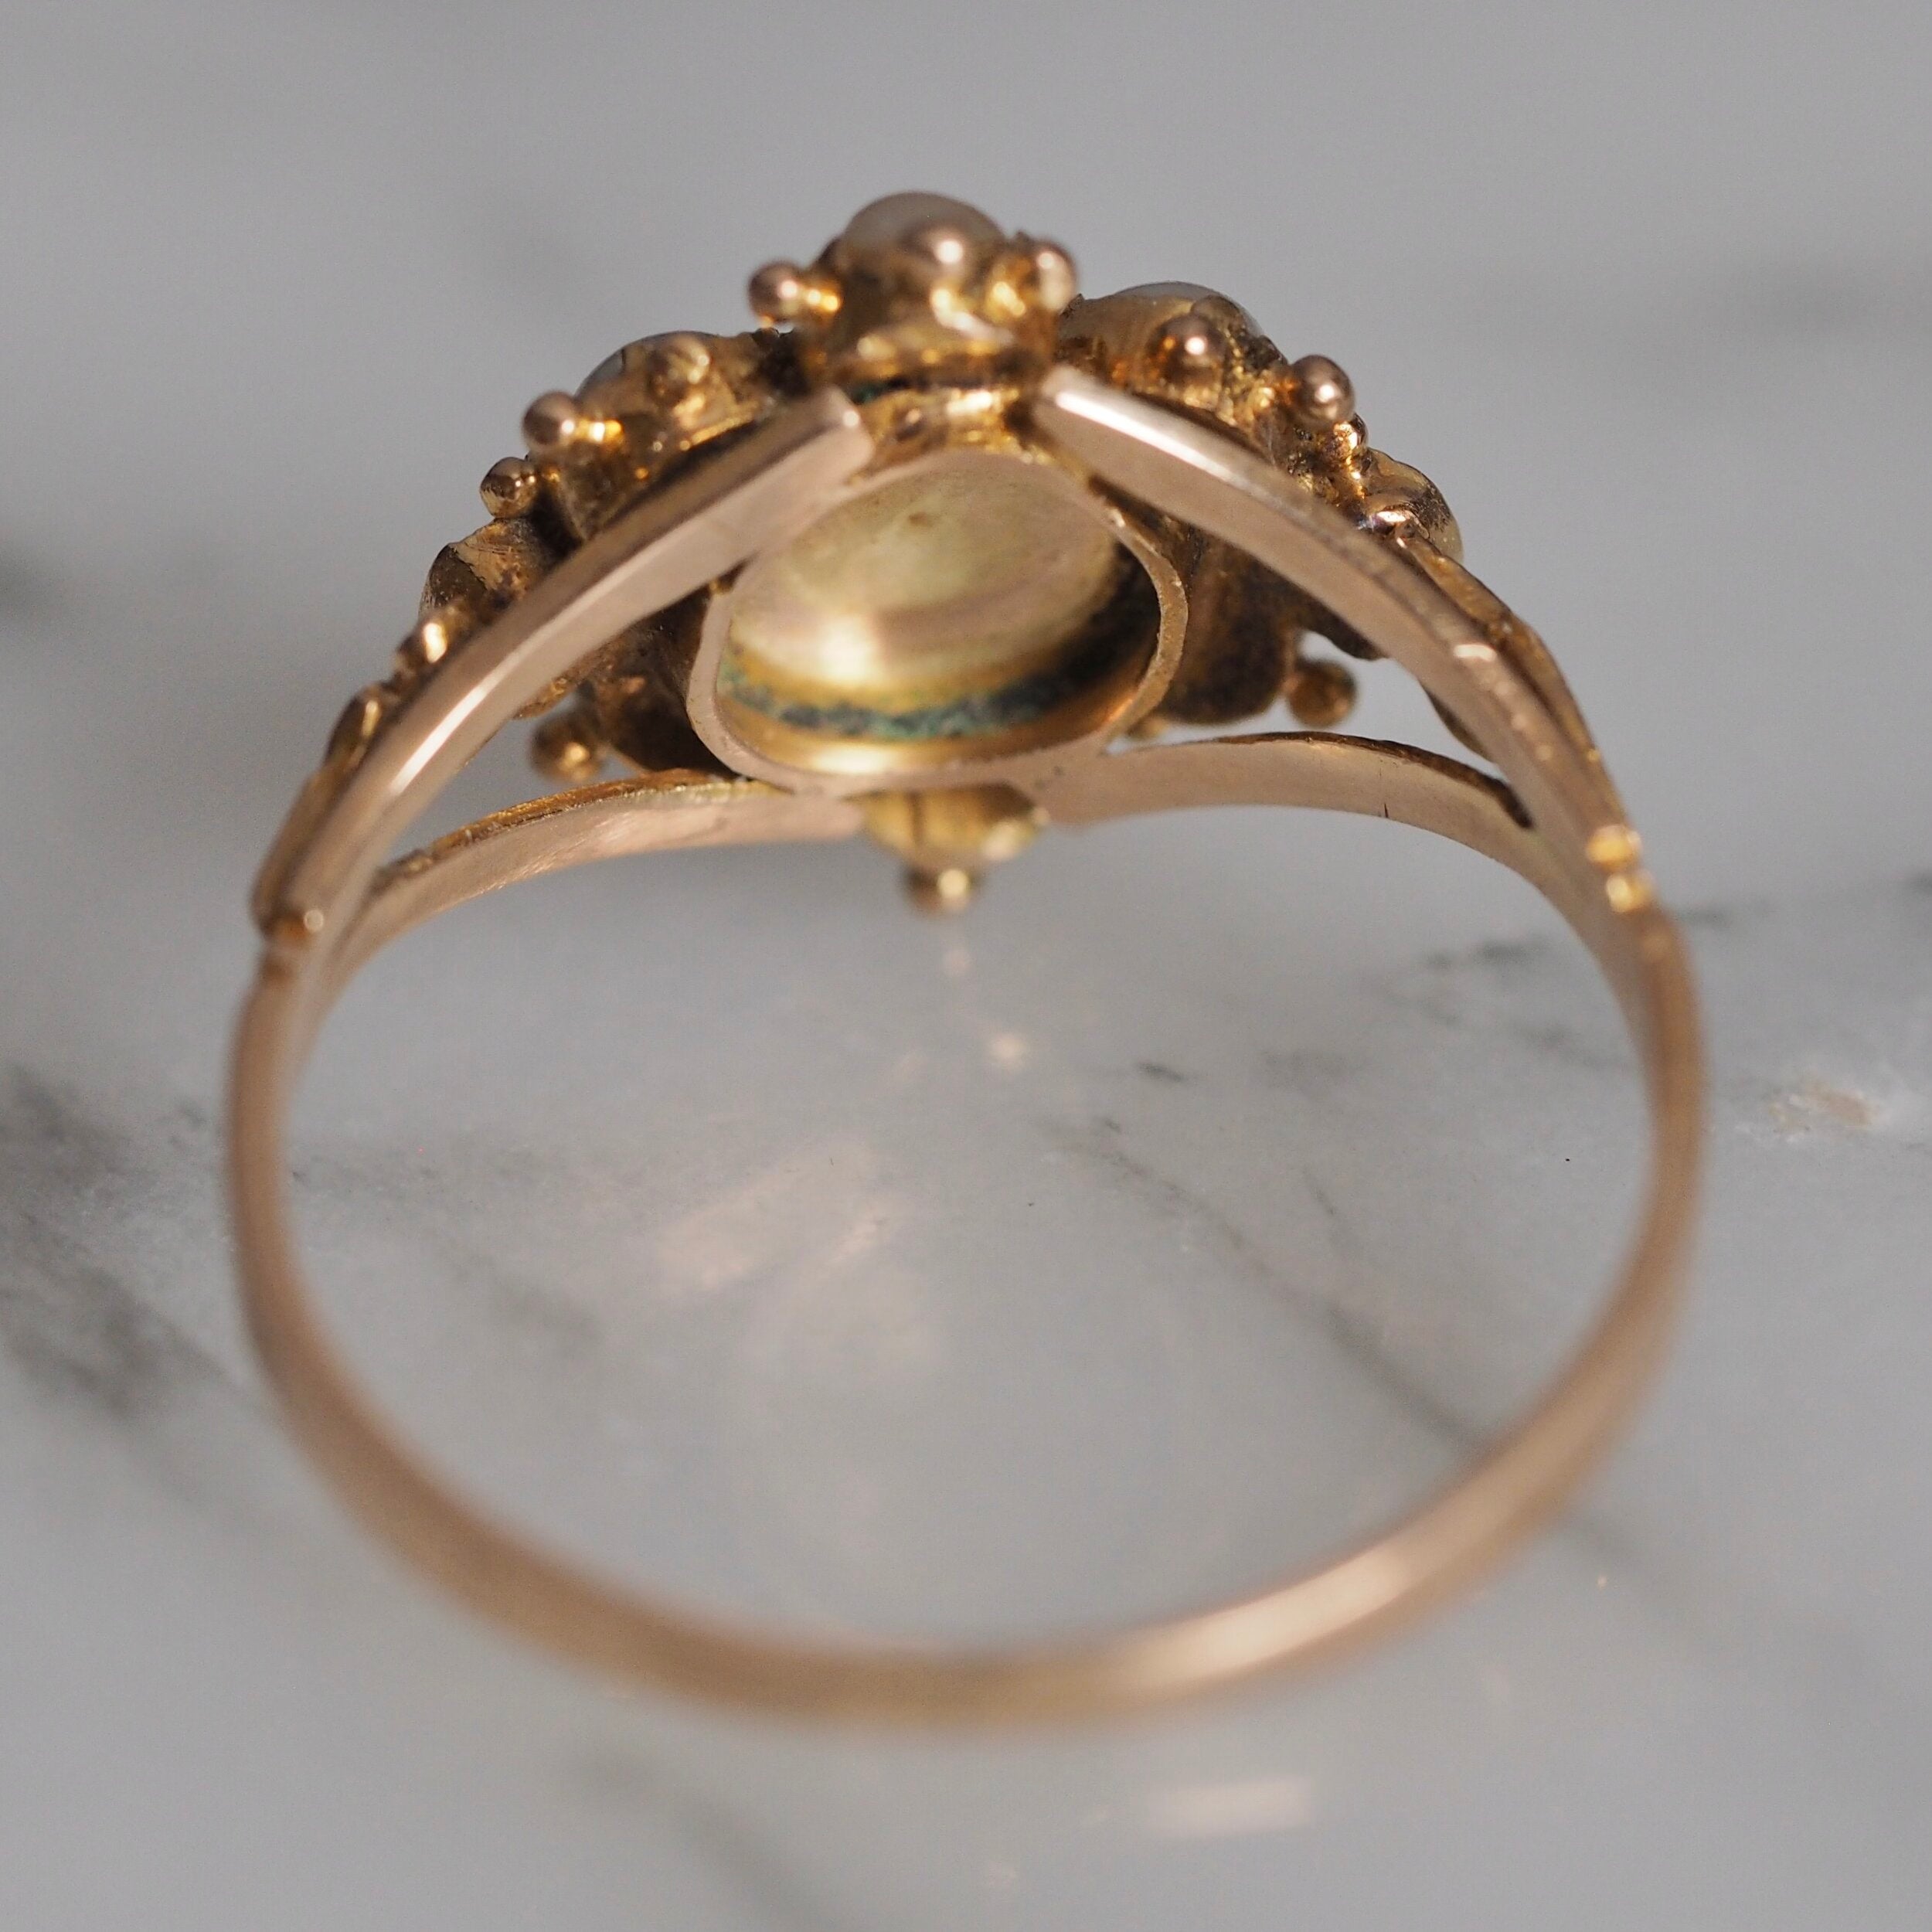 Antique Georgian c. 1820-1830 15k Gold Emerald and Natural Pearl Ring